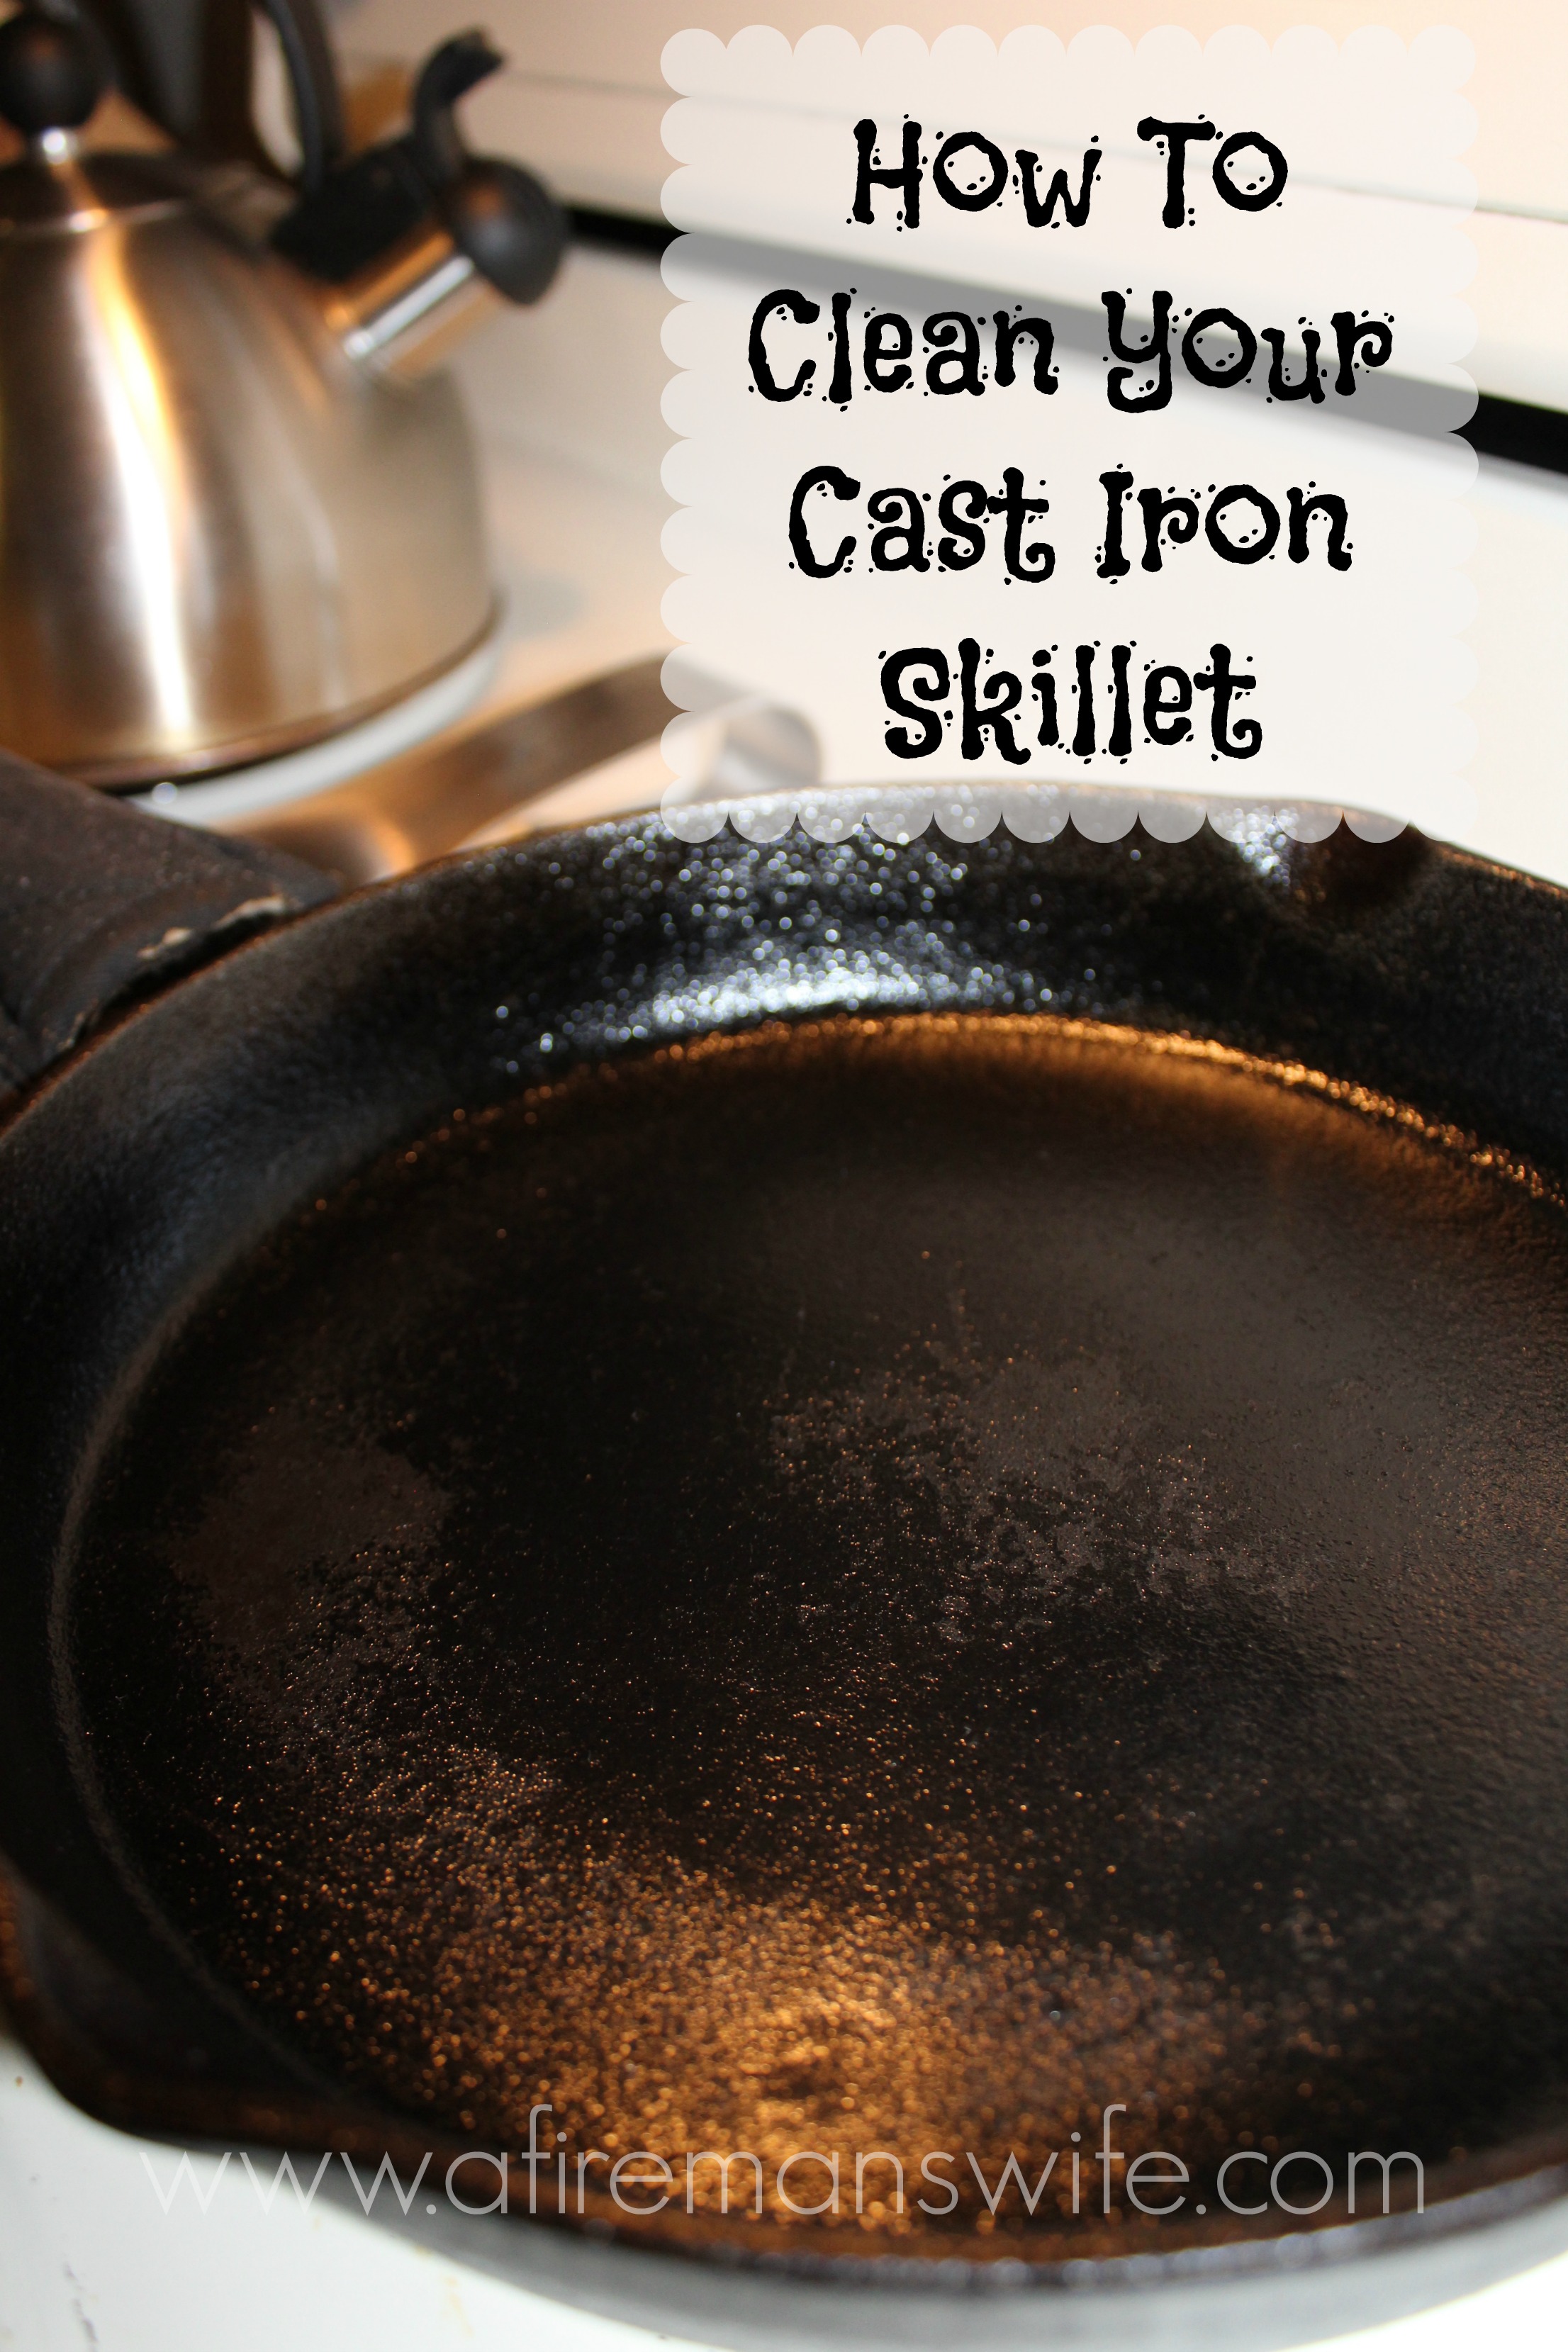 https://afiremanswife.com/wp-content/uploads/2017/02/How-to-clean-your-cast-iron-skillet.jpg